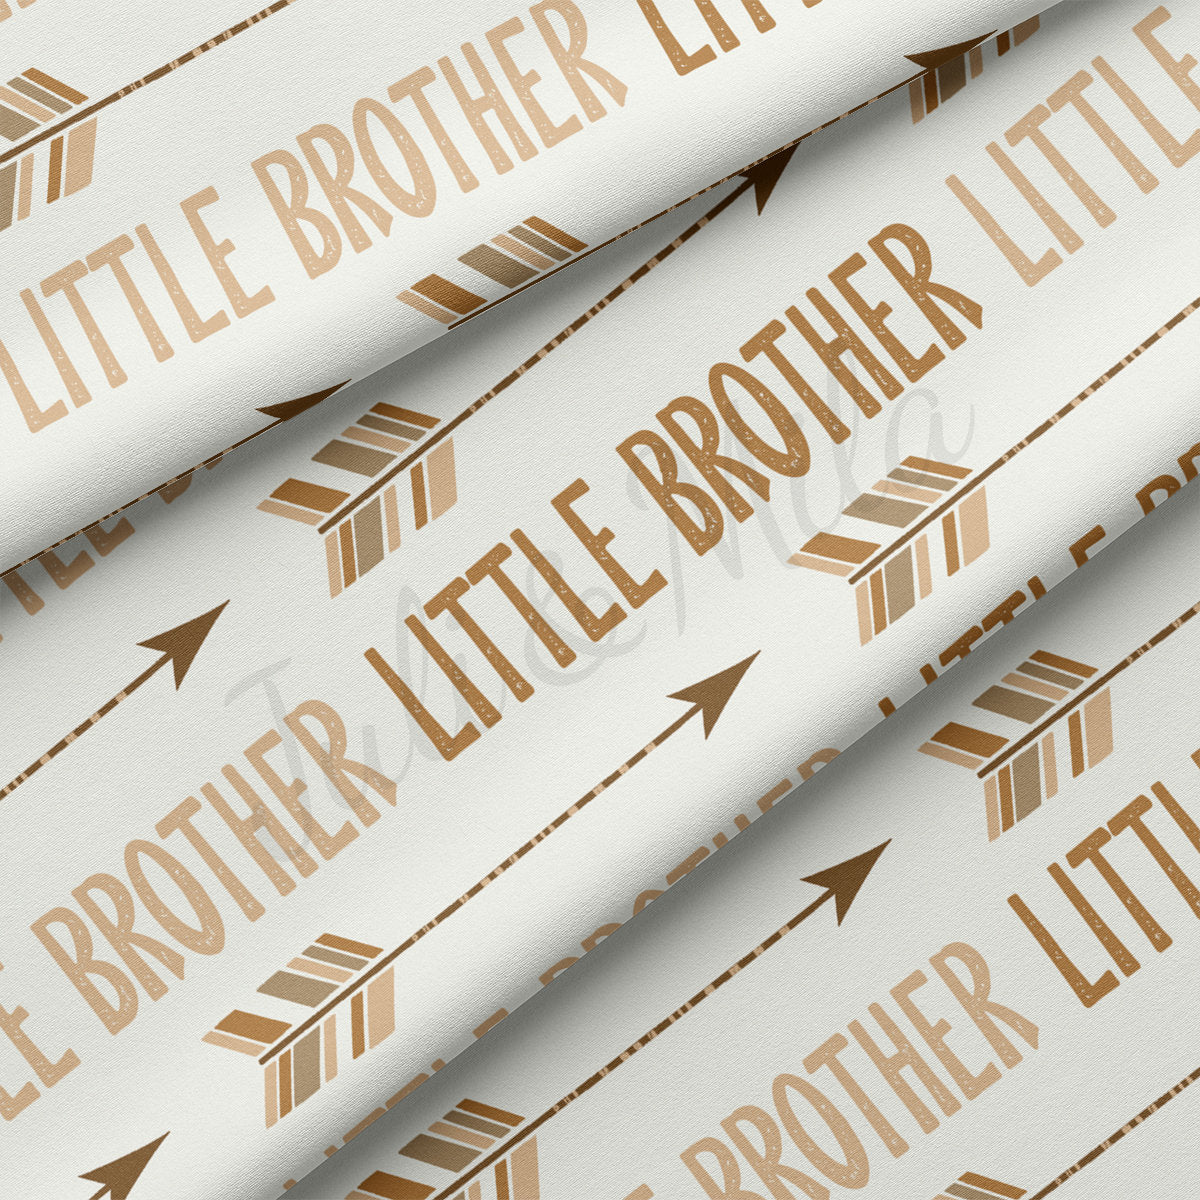 DBP Fabric Double Brushed Polyester DBP2394 Little Brother